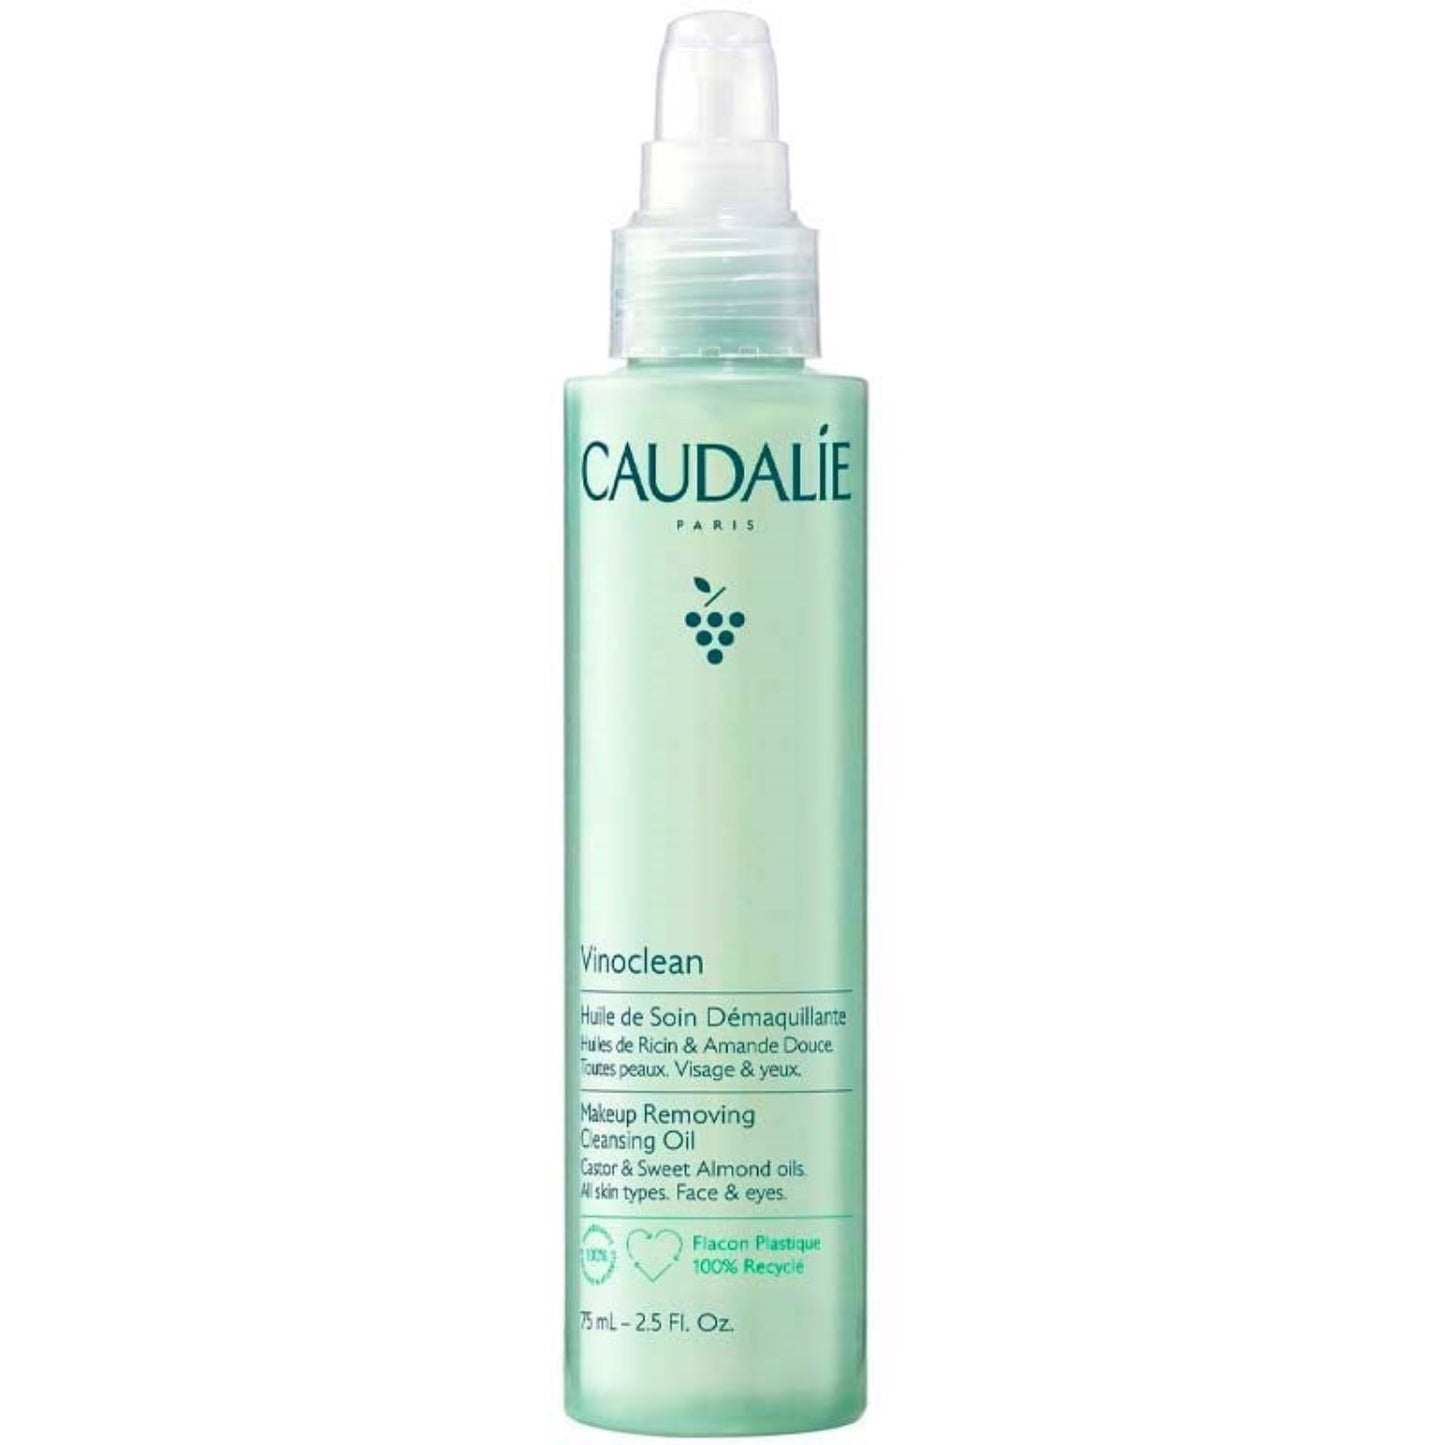 Caudalie Make-up Removing Cleansing Oil is crafted from 100% natural origin nourishing plant oils.